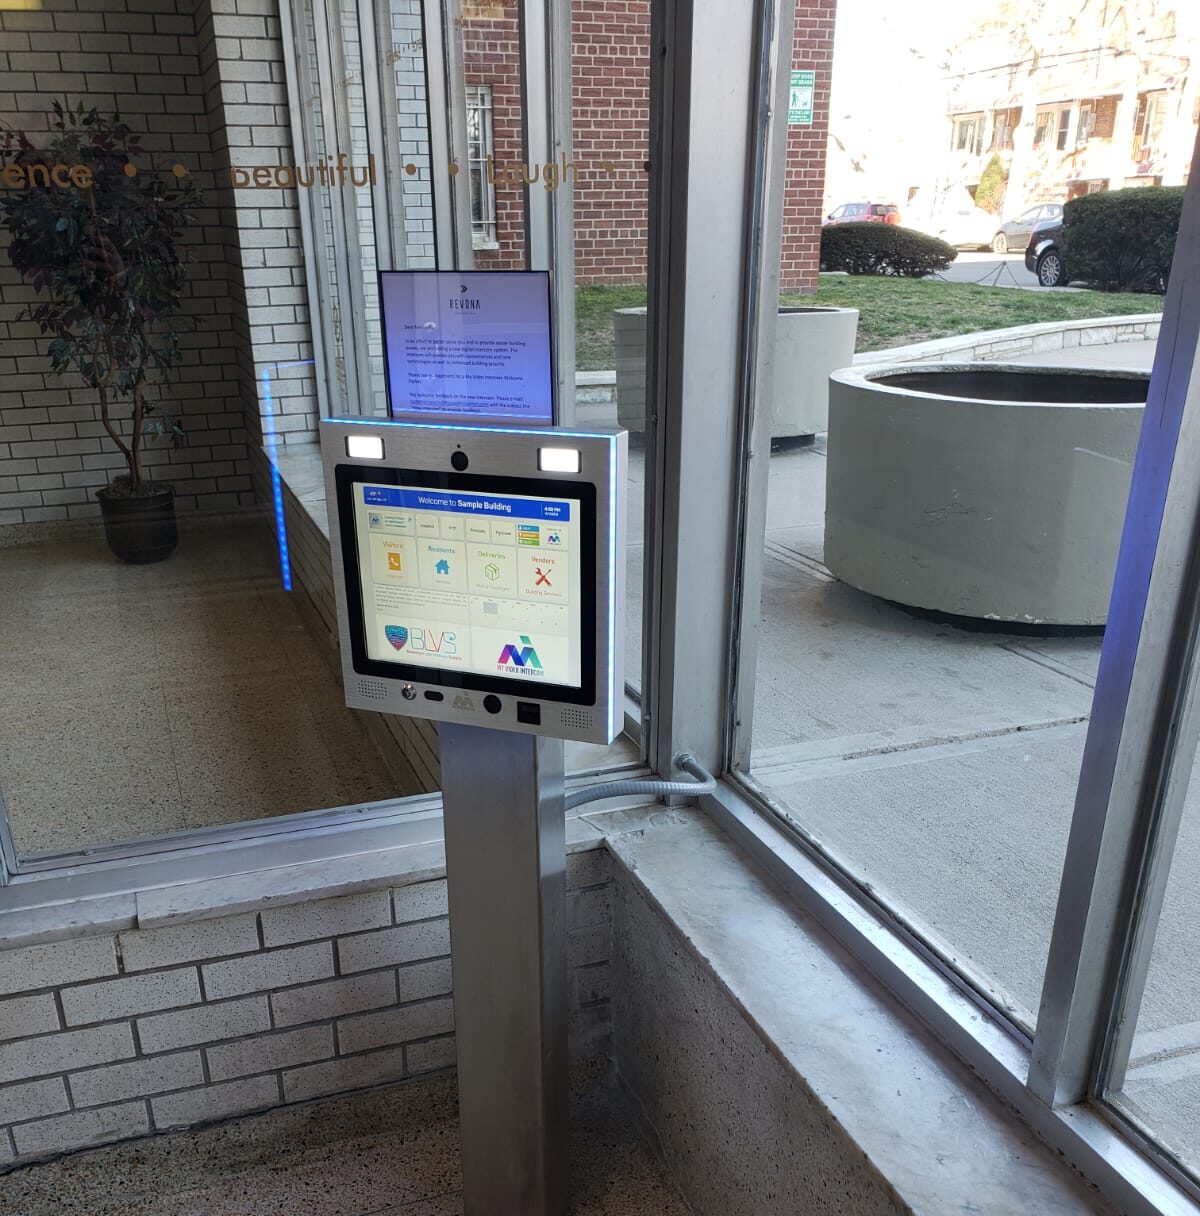 mvi keycom mounted on metal stand inside of building